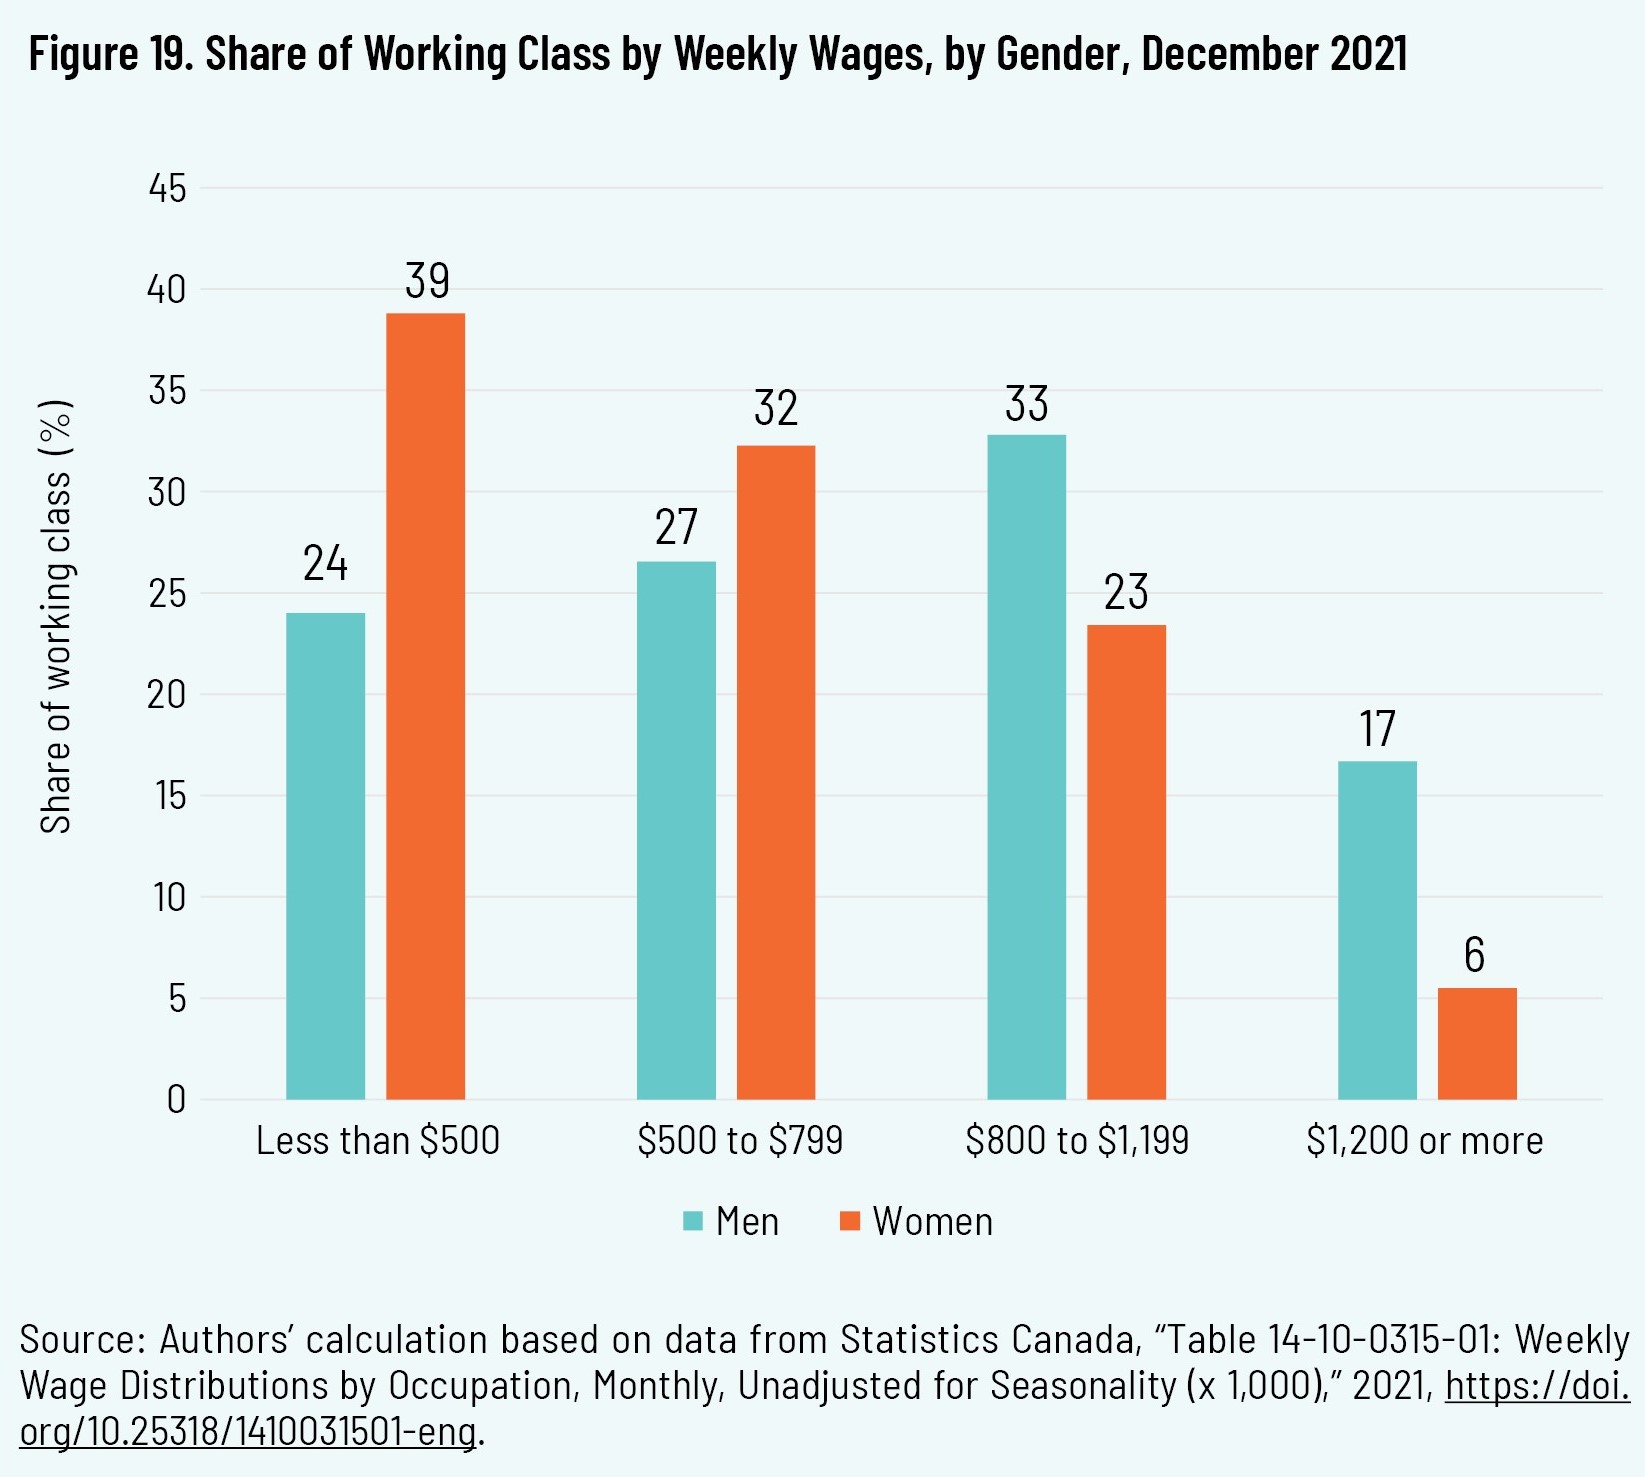 Figure 19. Share of Working Class by Weekly Wages, by Gender, December 2021